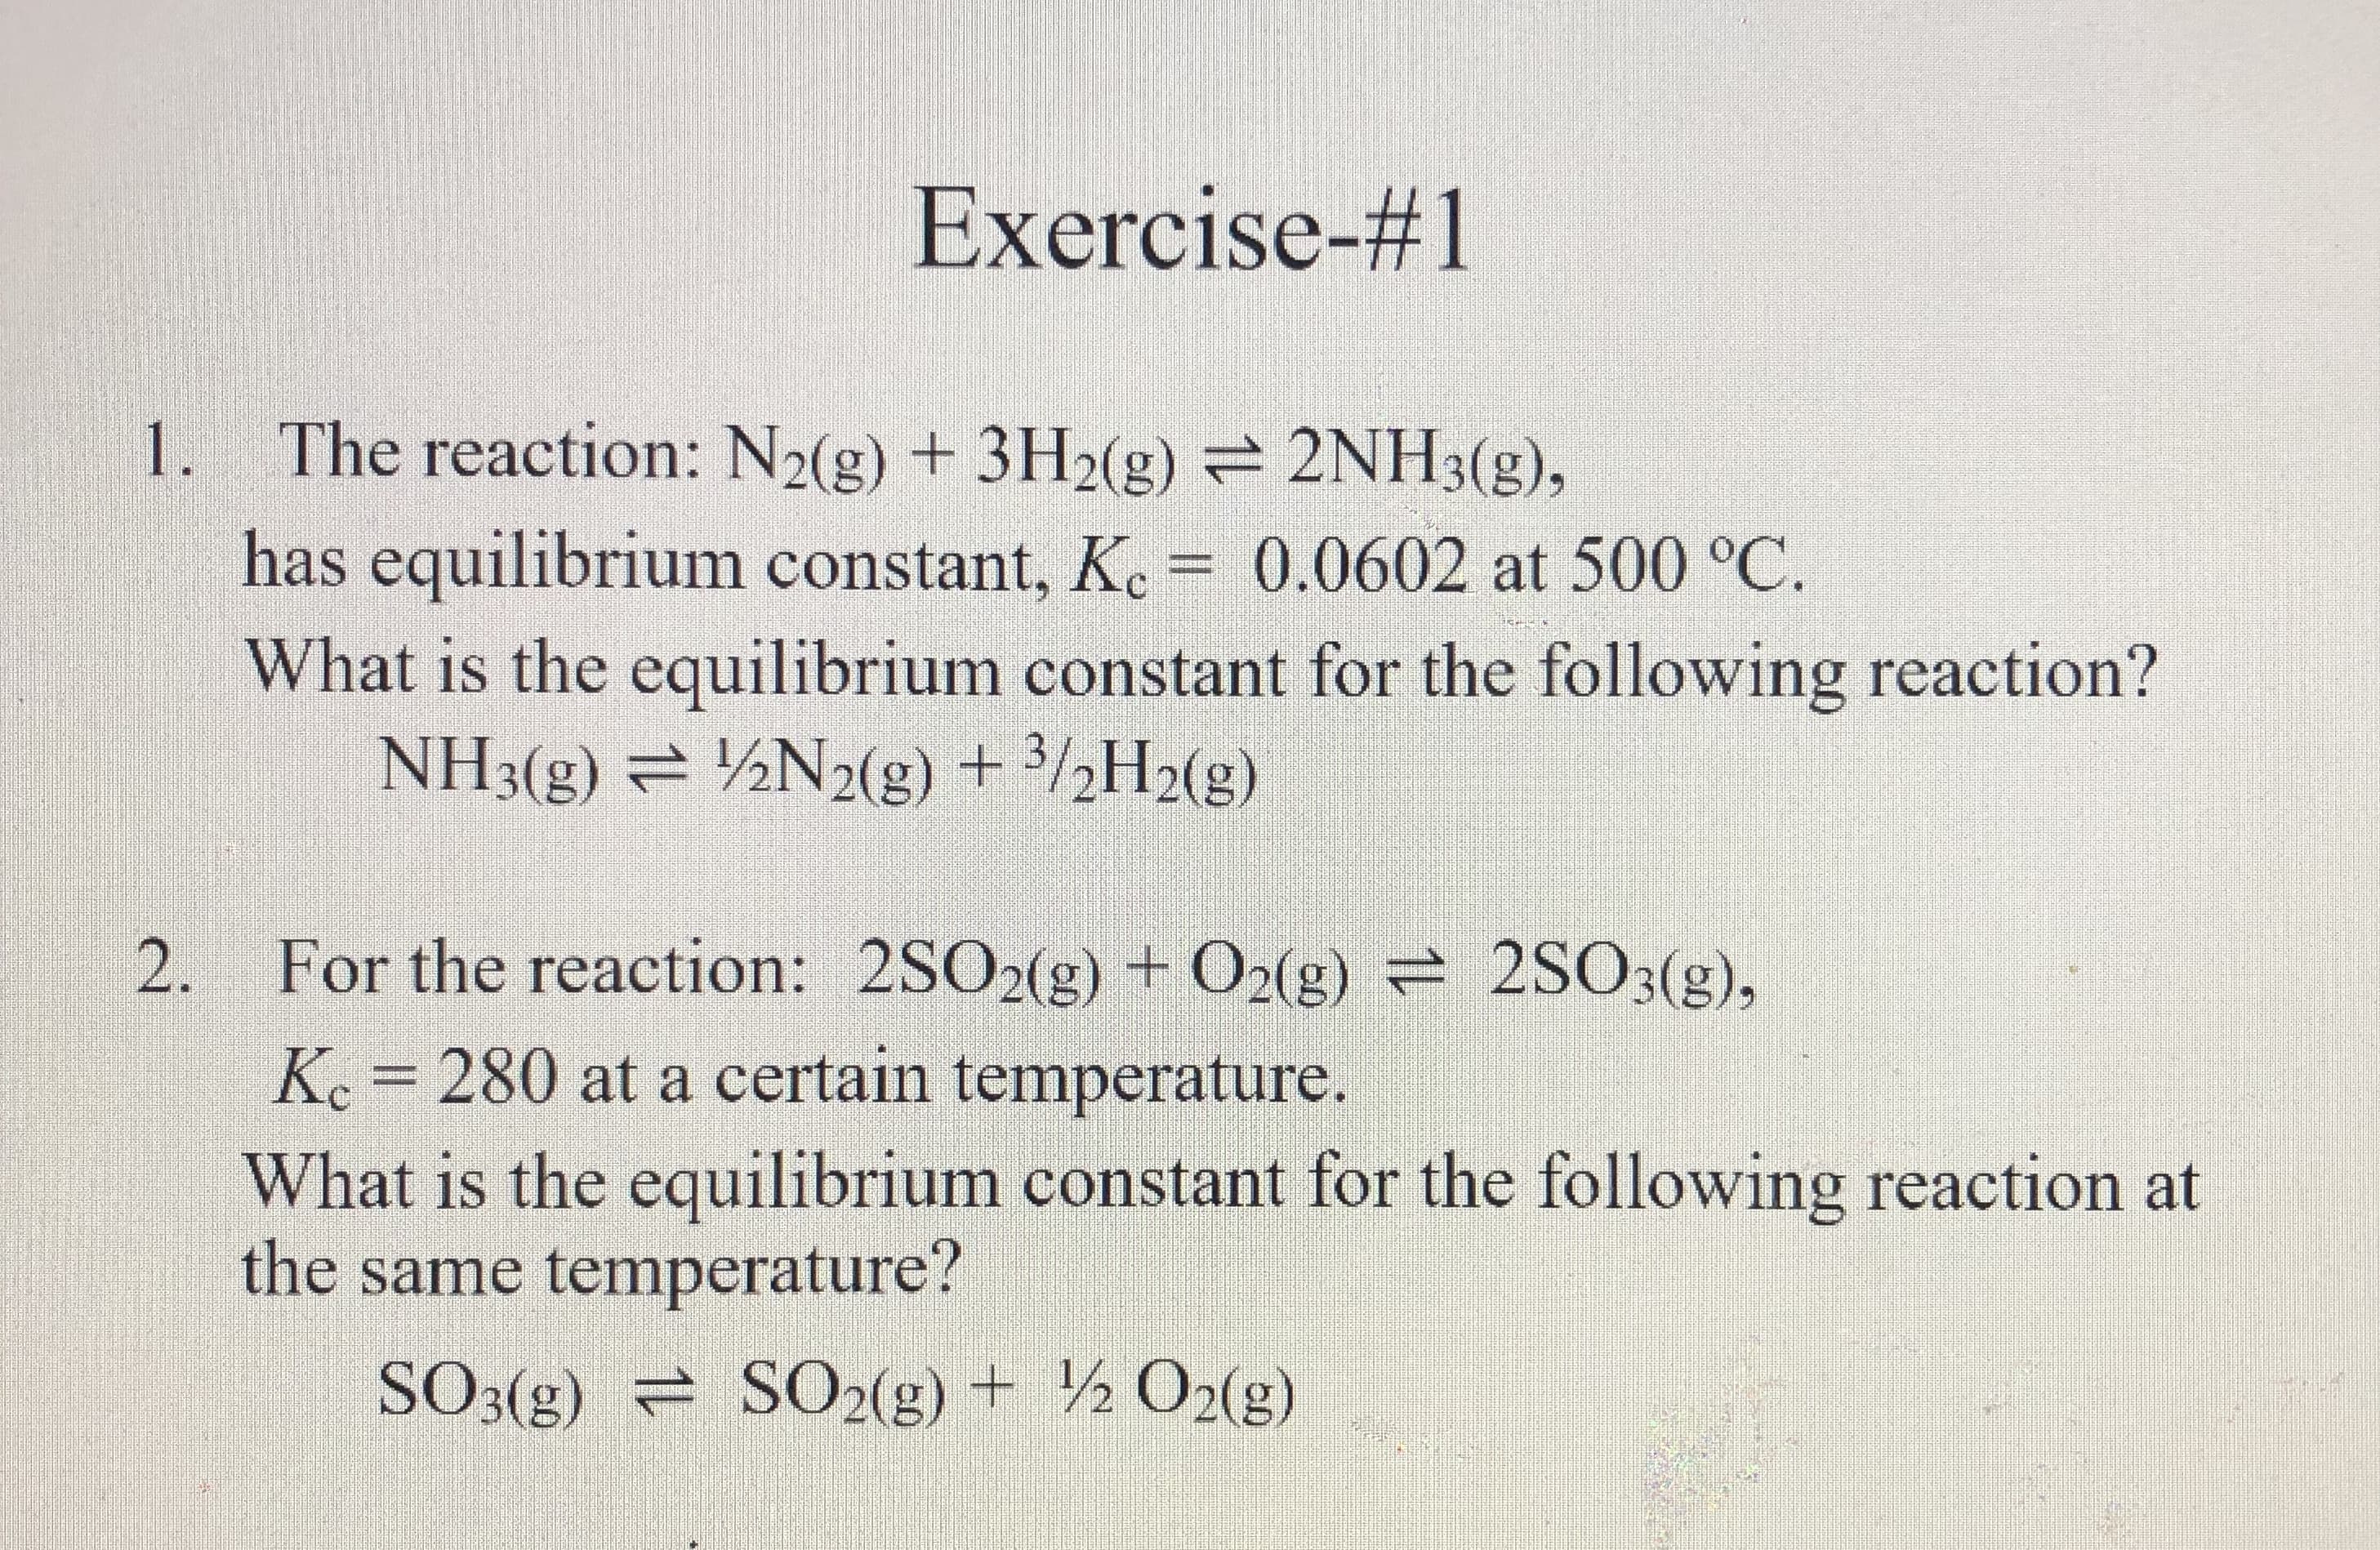 1. The reaction: N2(g) + 3H2(g) 2NH3(g),
has equilibrium constant, K. = 0.0602 at 500 °C.
What is the equilibrium constant for the following reaction?
NH3(g) = ½N2(g) + 3/½H2(g)
